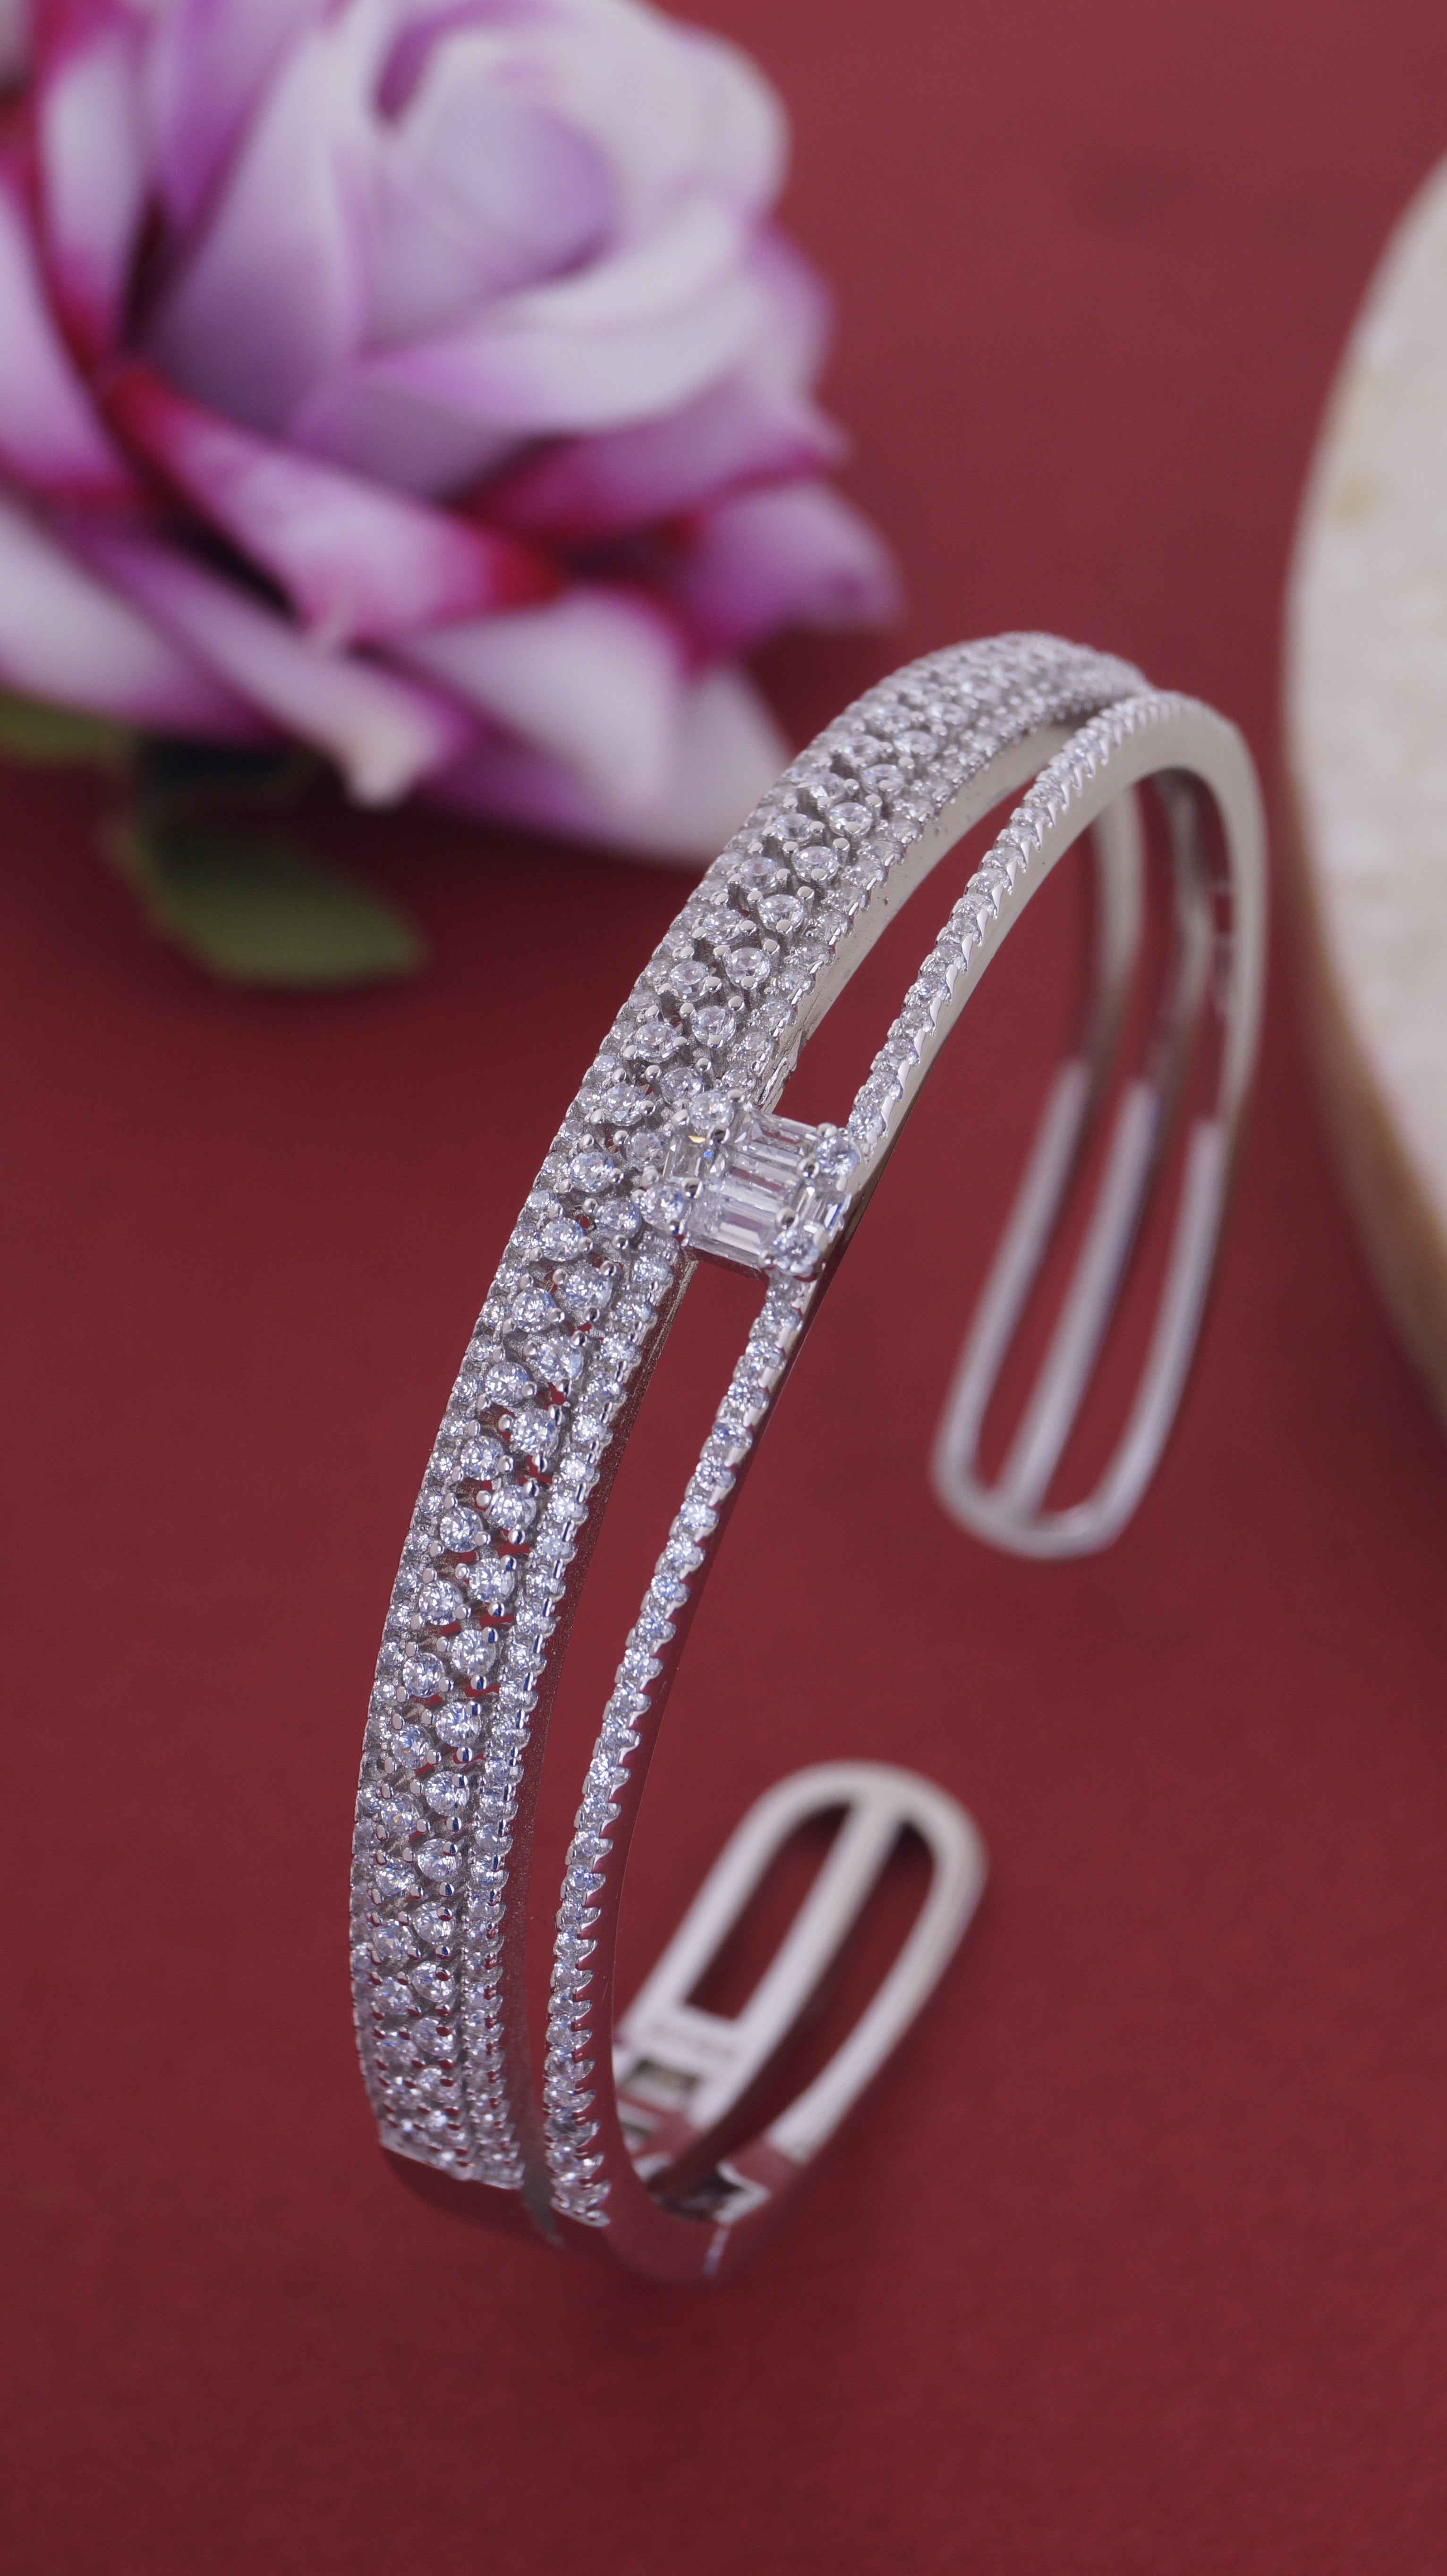 925 Sterling Silver Handmade Amazing Engraving Design Wrist Bangle Bracelet  Kada, Top Class Jewelry From Rajasthan India - Etsy